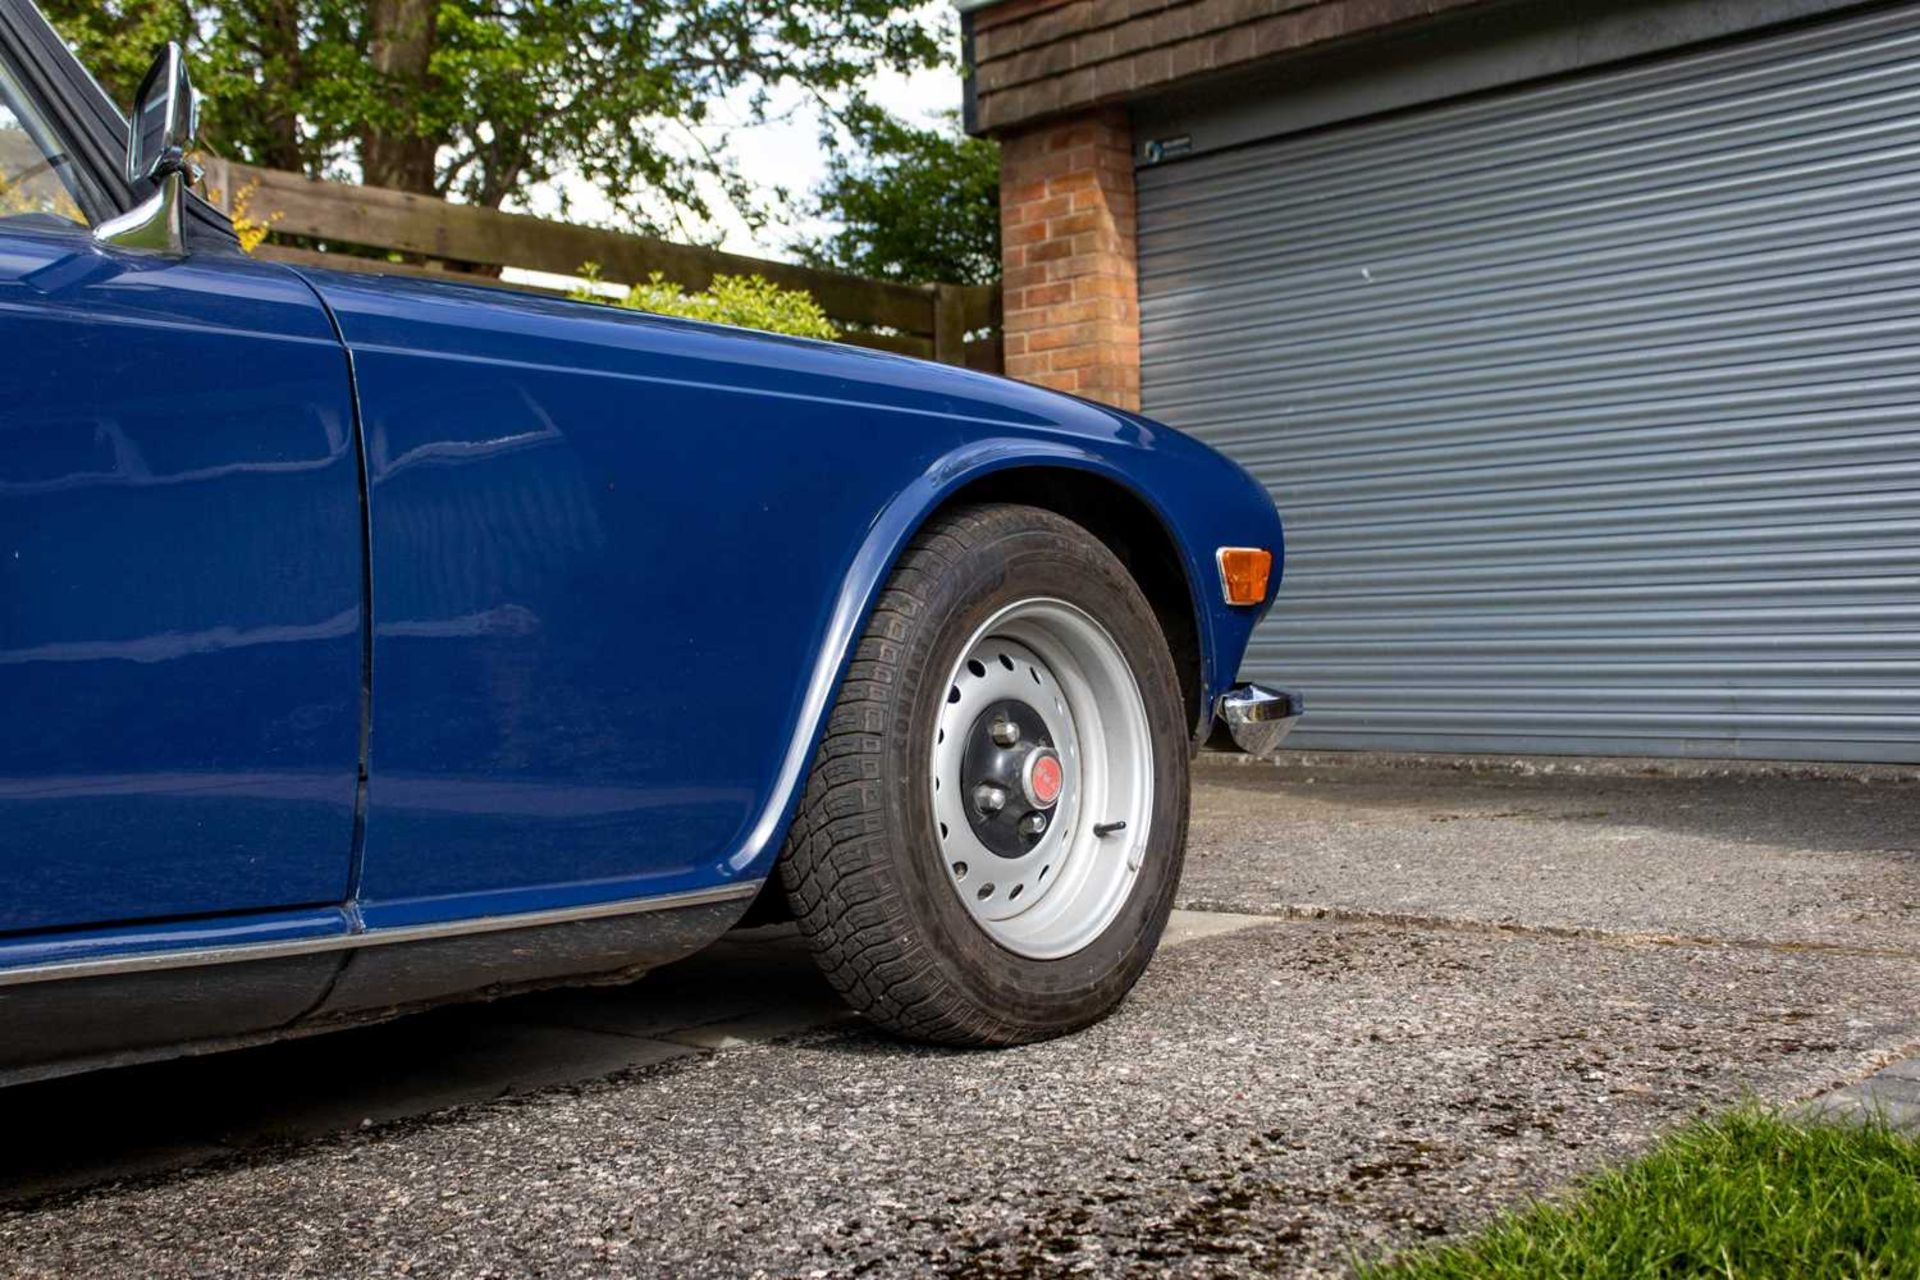 1972 Triumph TR6 Home market example, specified with manual overdrive transmission - Image 35 of 95